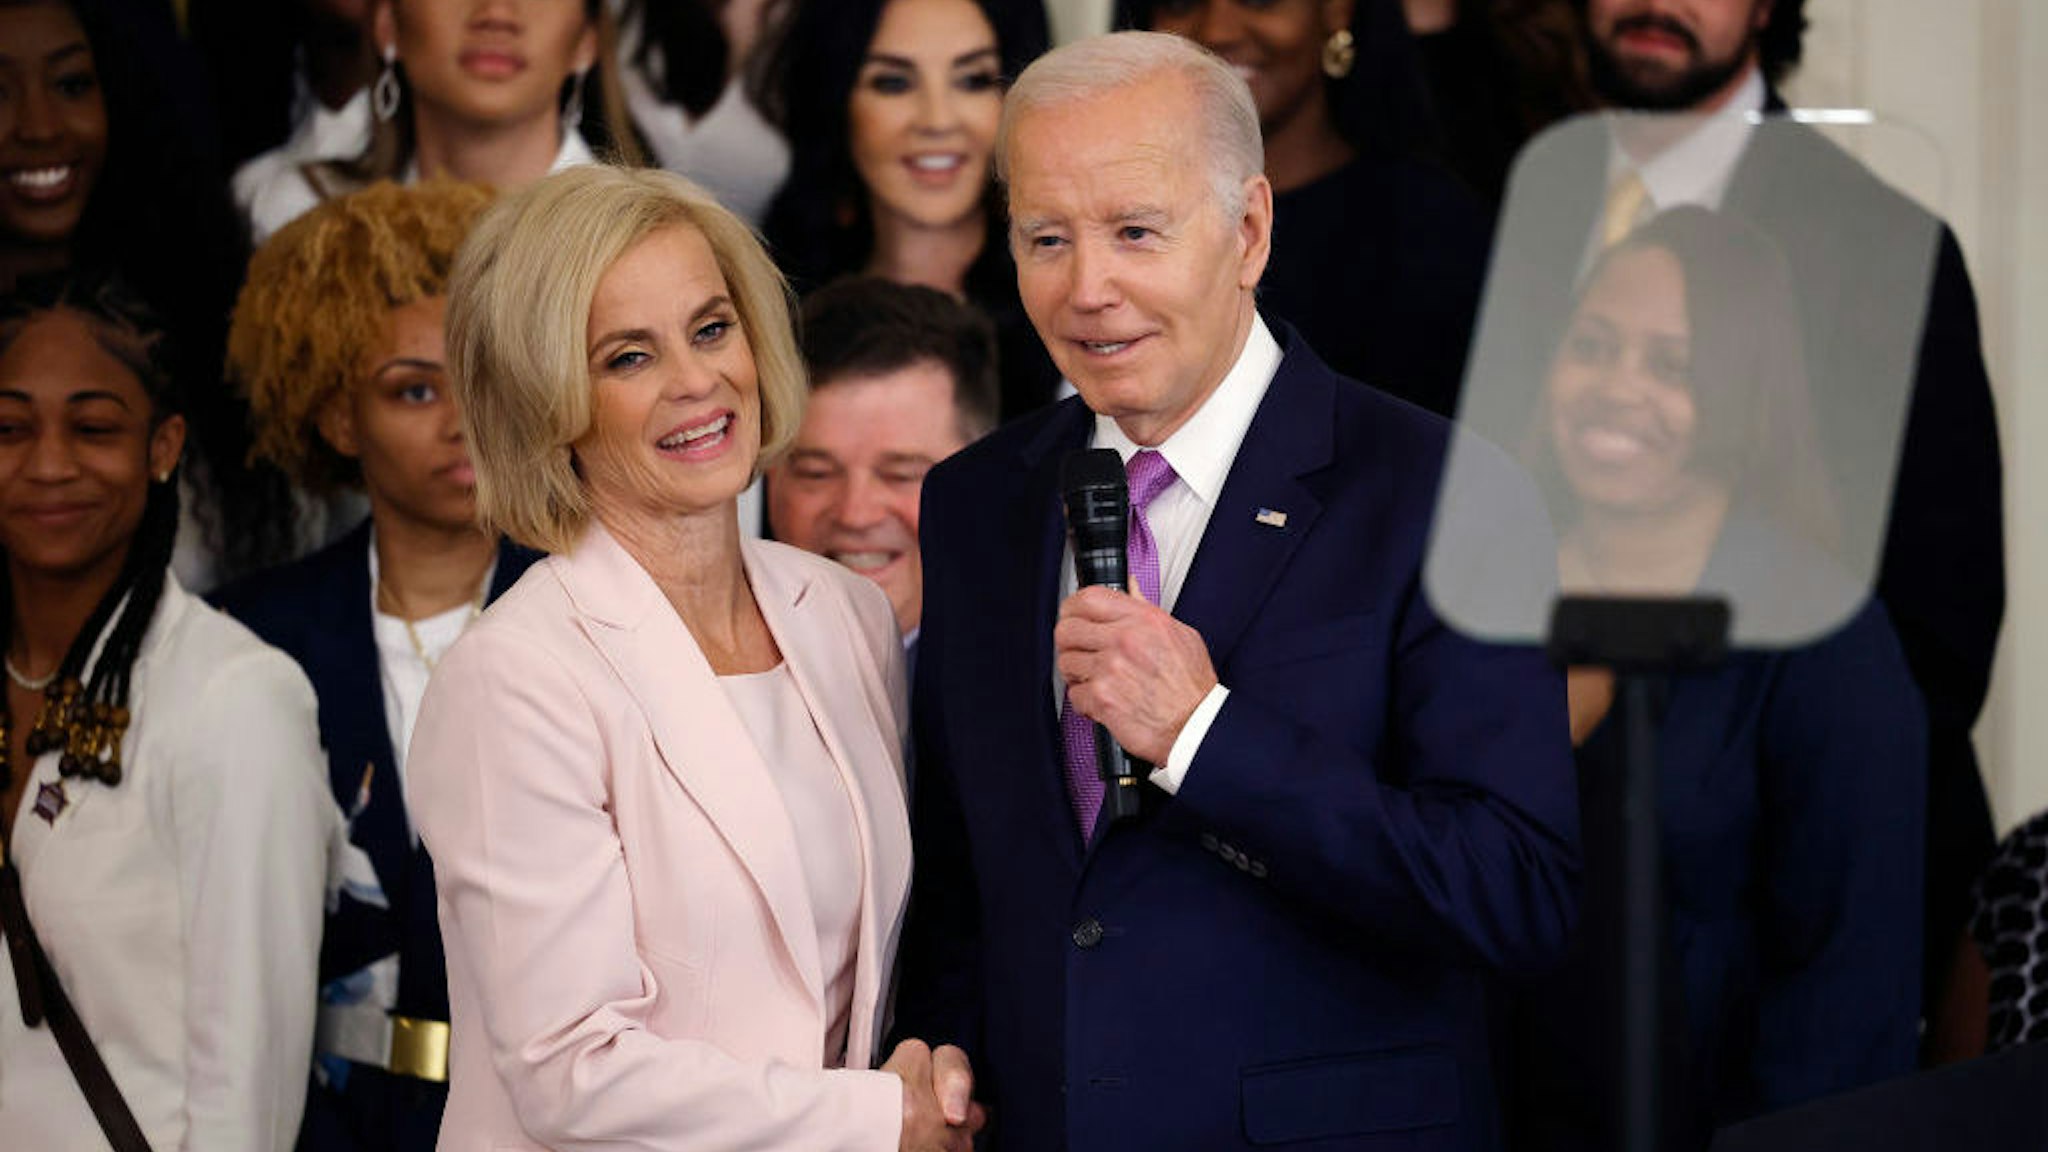 U.S. President Joe Biden and Louisiana State University women's basketball head coach Kim Mulkey deliver remarks during a celebration of the team's NCAA Division I national championship in the East Room of the White House on May 26, 2023 in Washington, DC. (Photo by Chip Somodevilla/Getty Images)